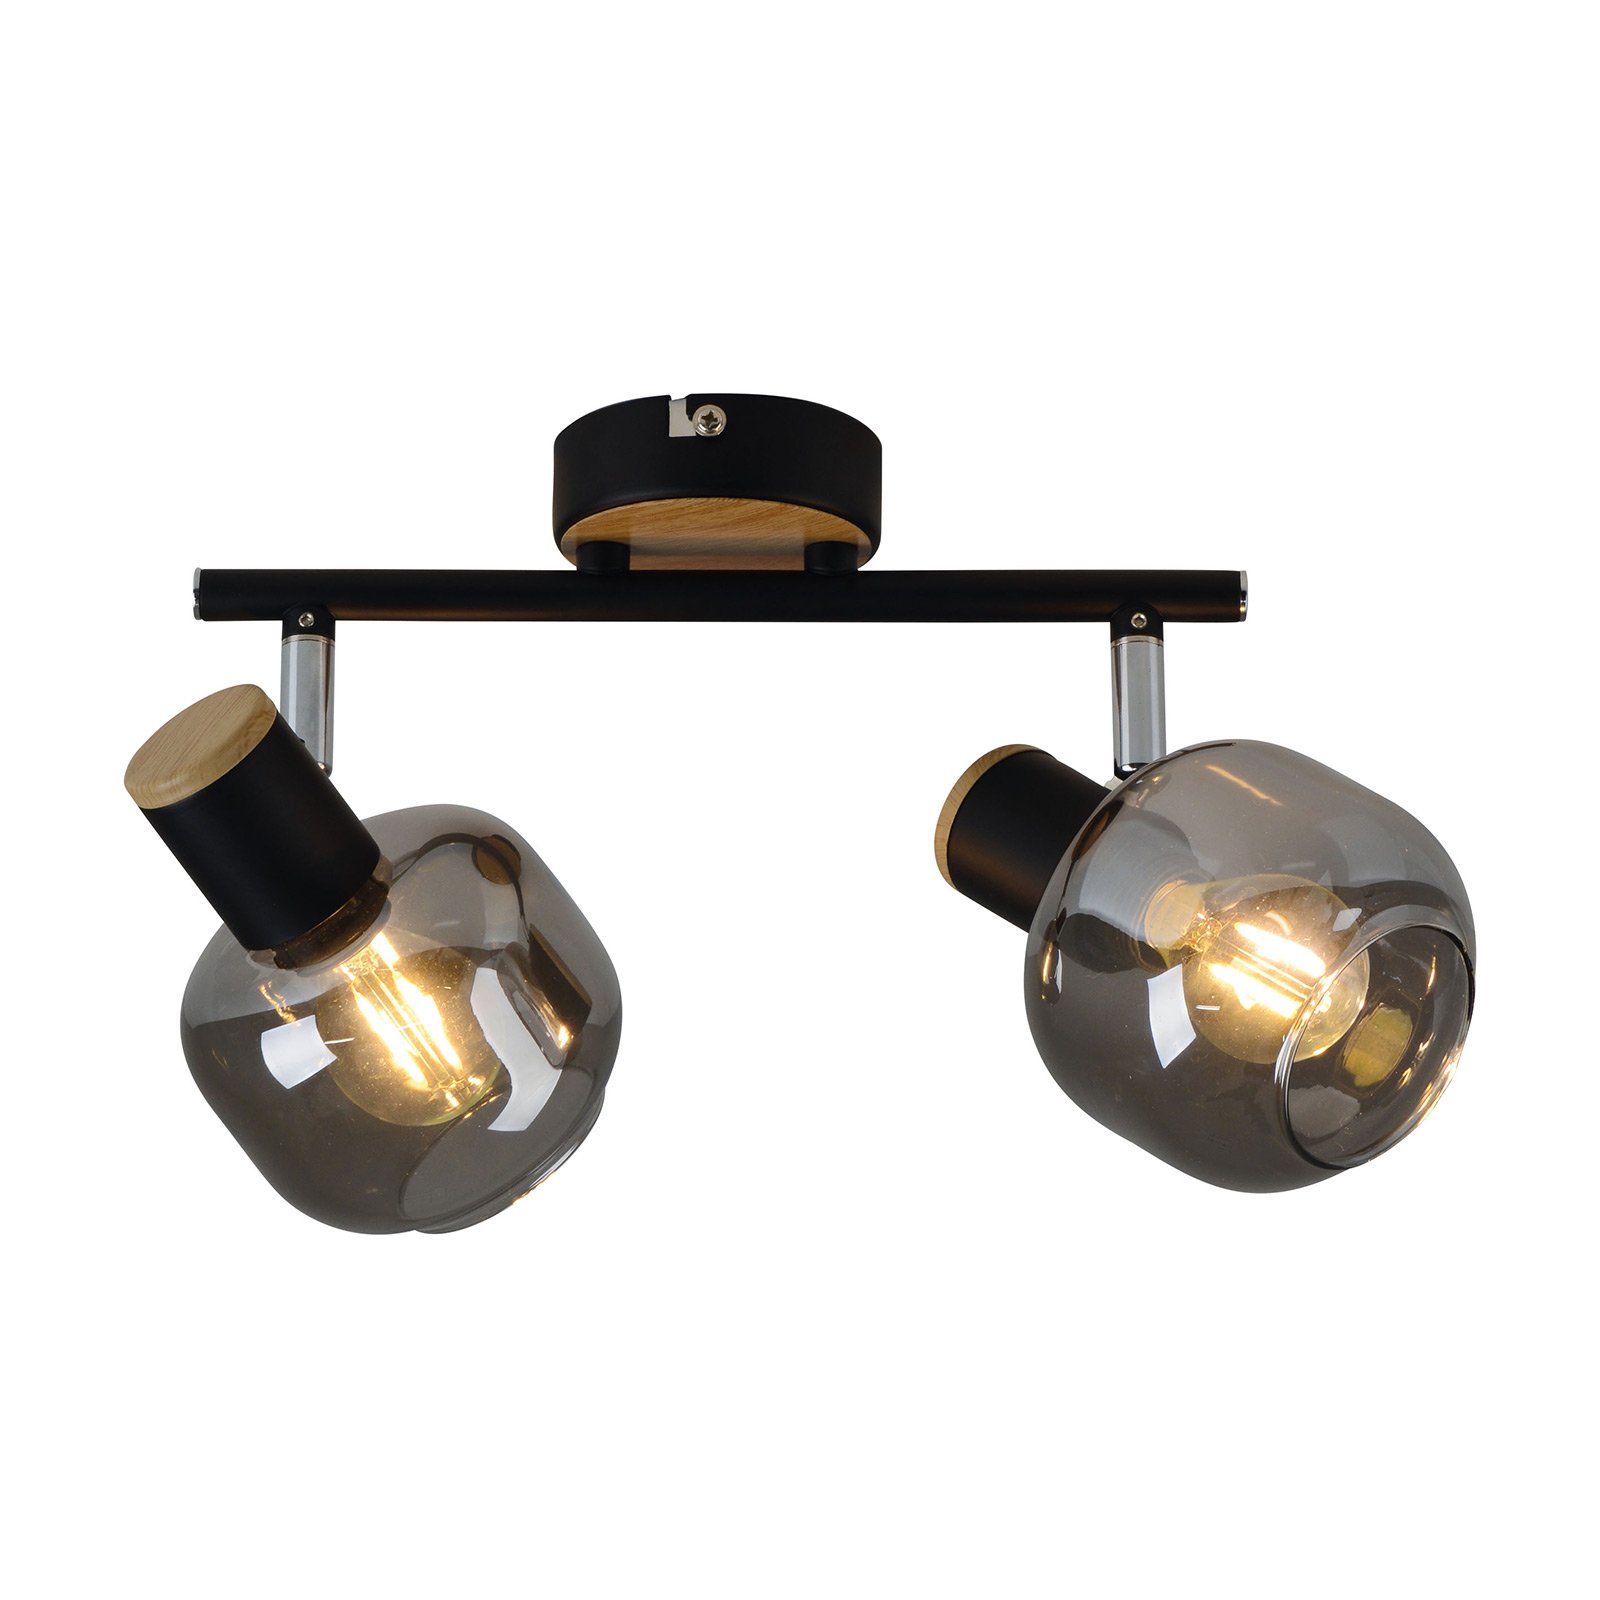 1350122 ceiling light with smoked glass, two-bulb